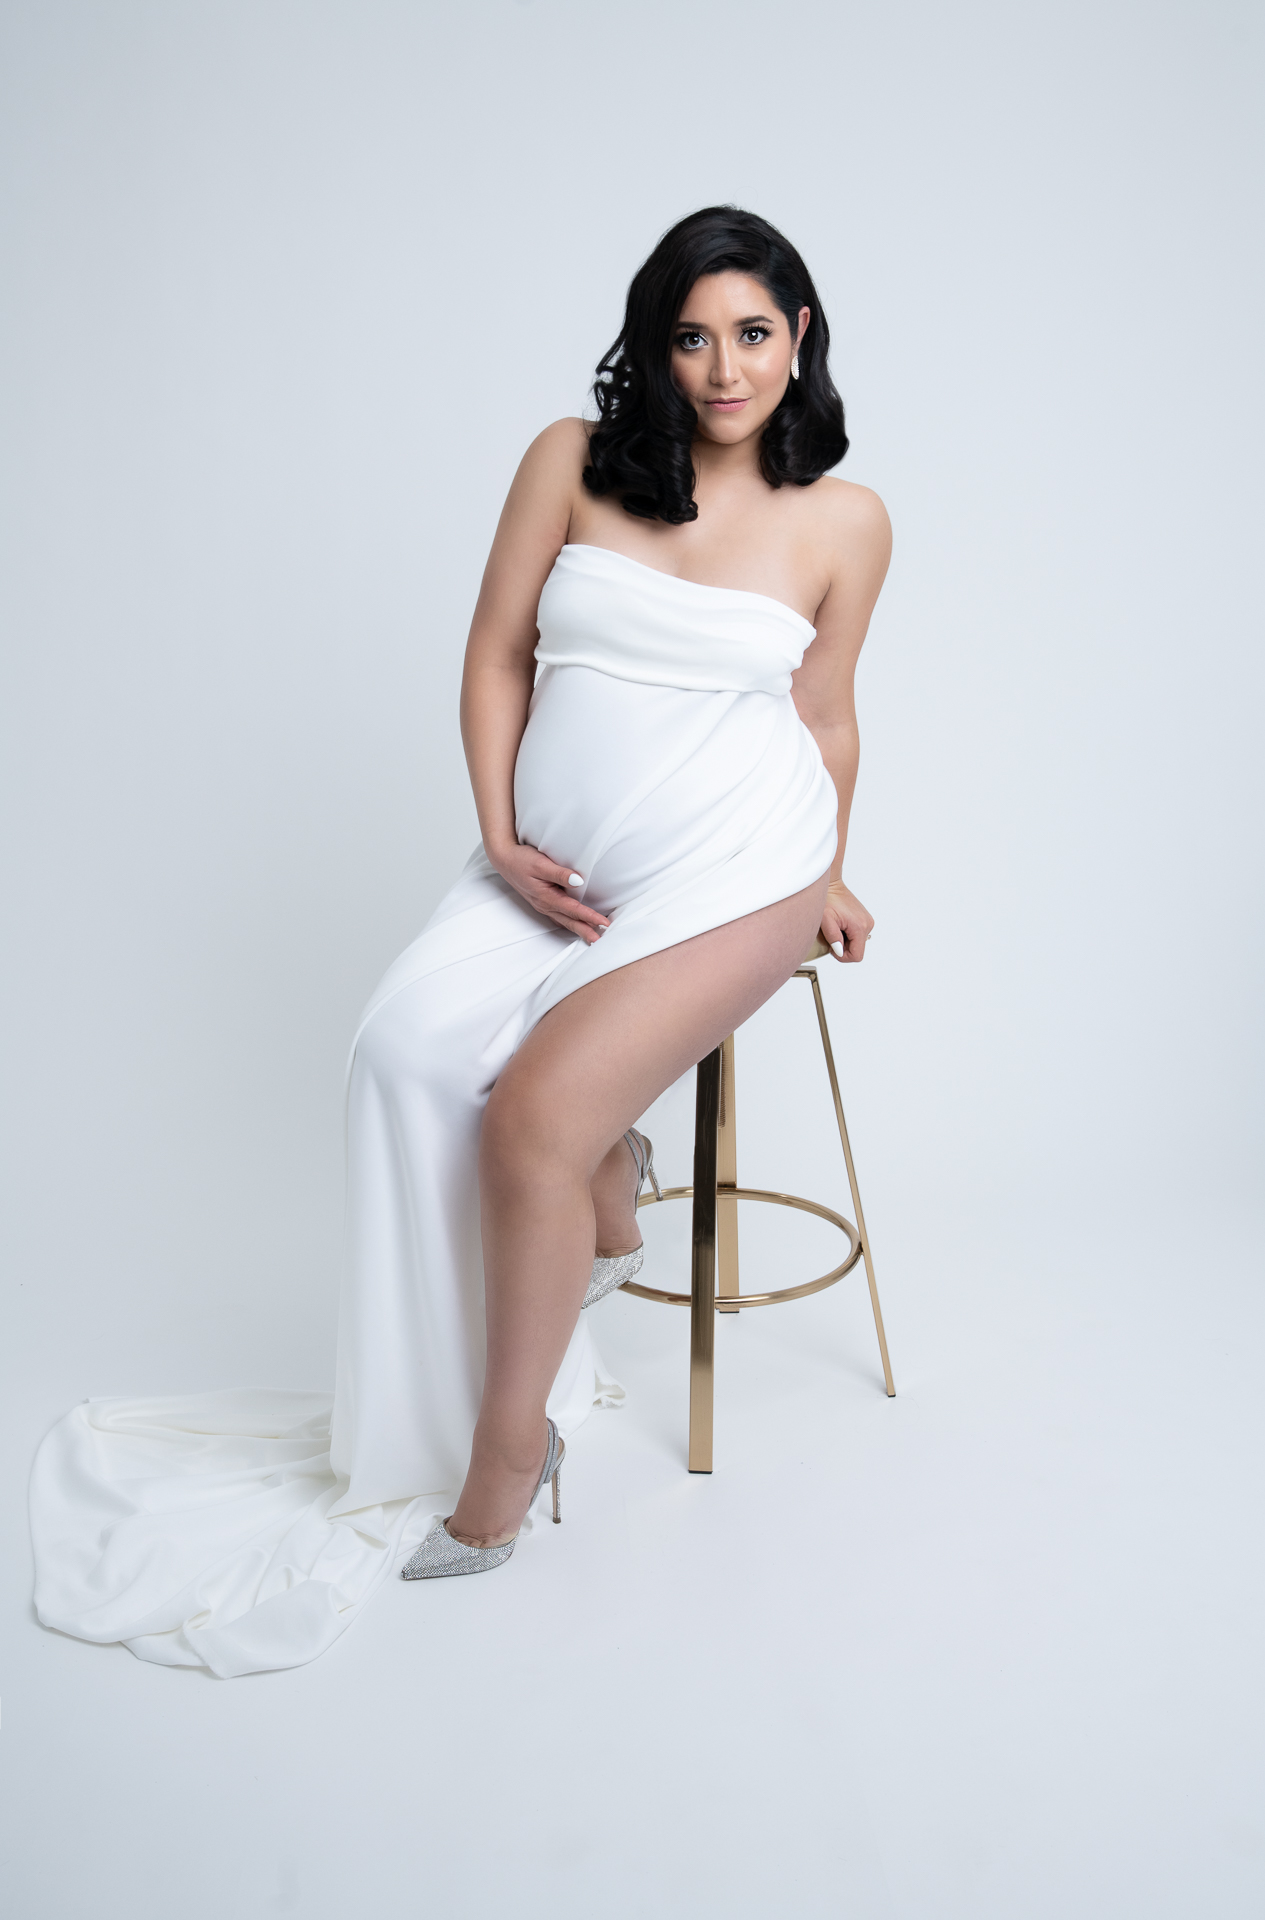 Dark hair pregnant woman sitting down on golden color chair wearing white fabric dress